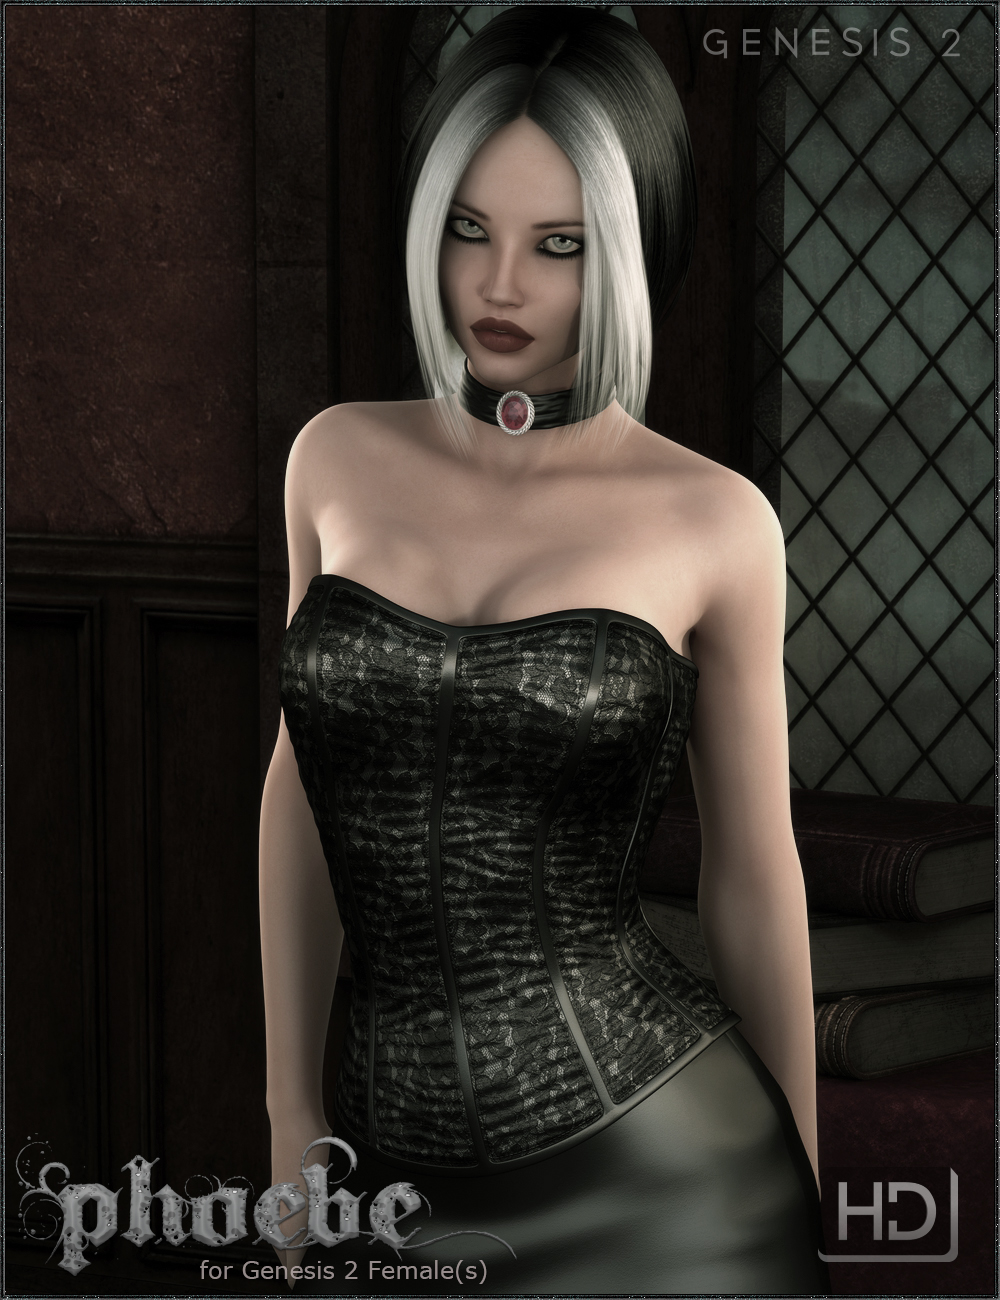 Phoebe HD Bundle - Gothic Character, Outfit and Hair by: Fisty & DarcFred Winkler ArtValea, 3D Models by Daz 3D